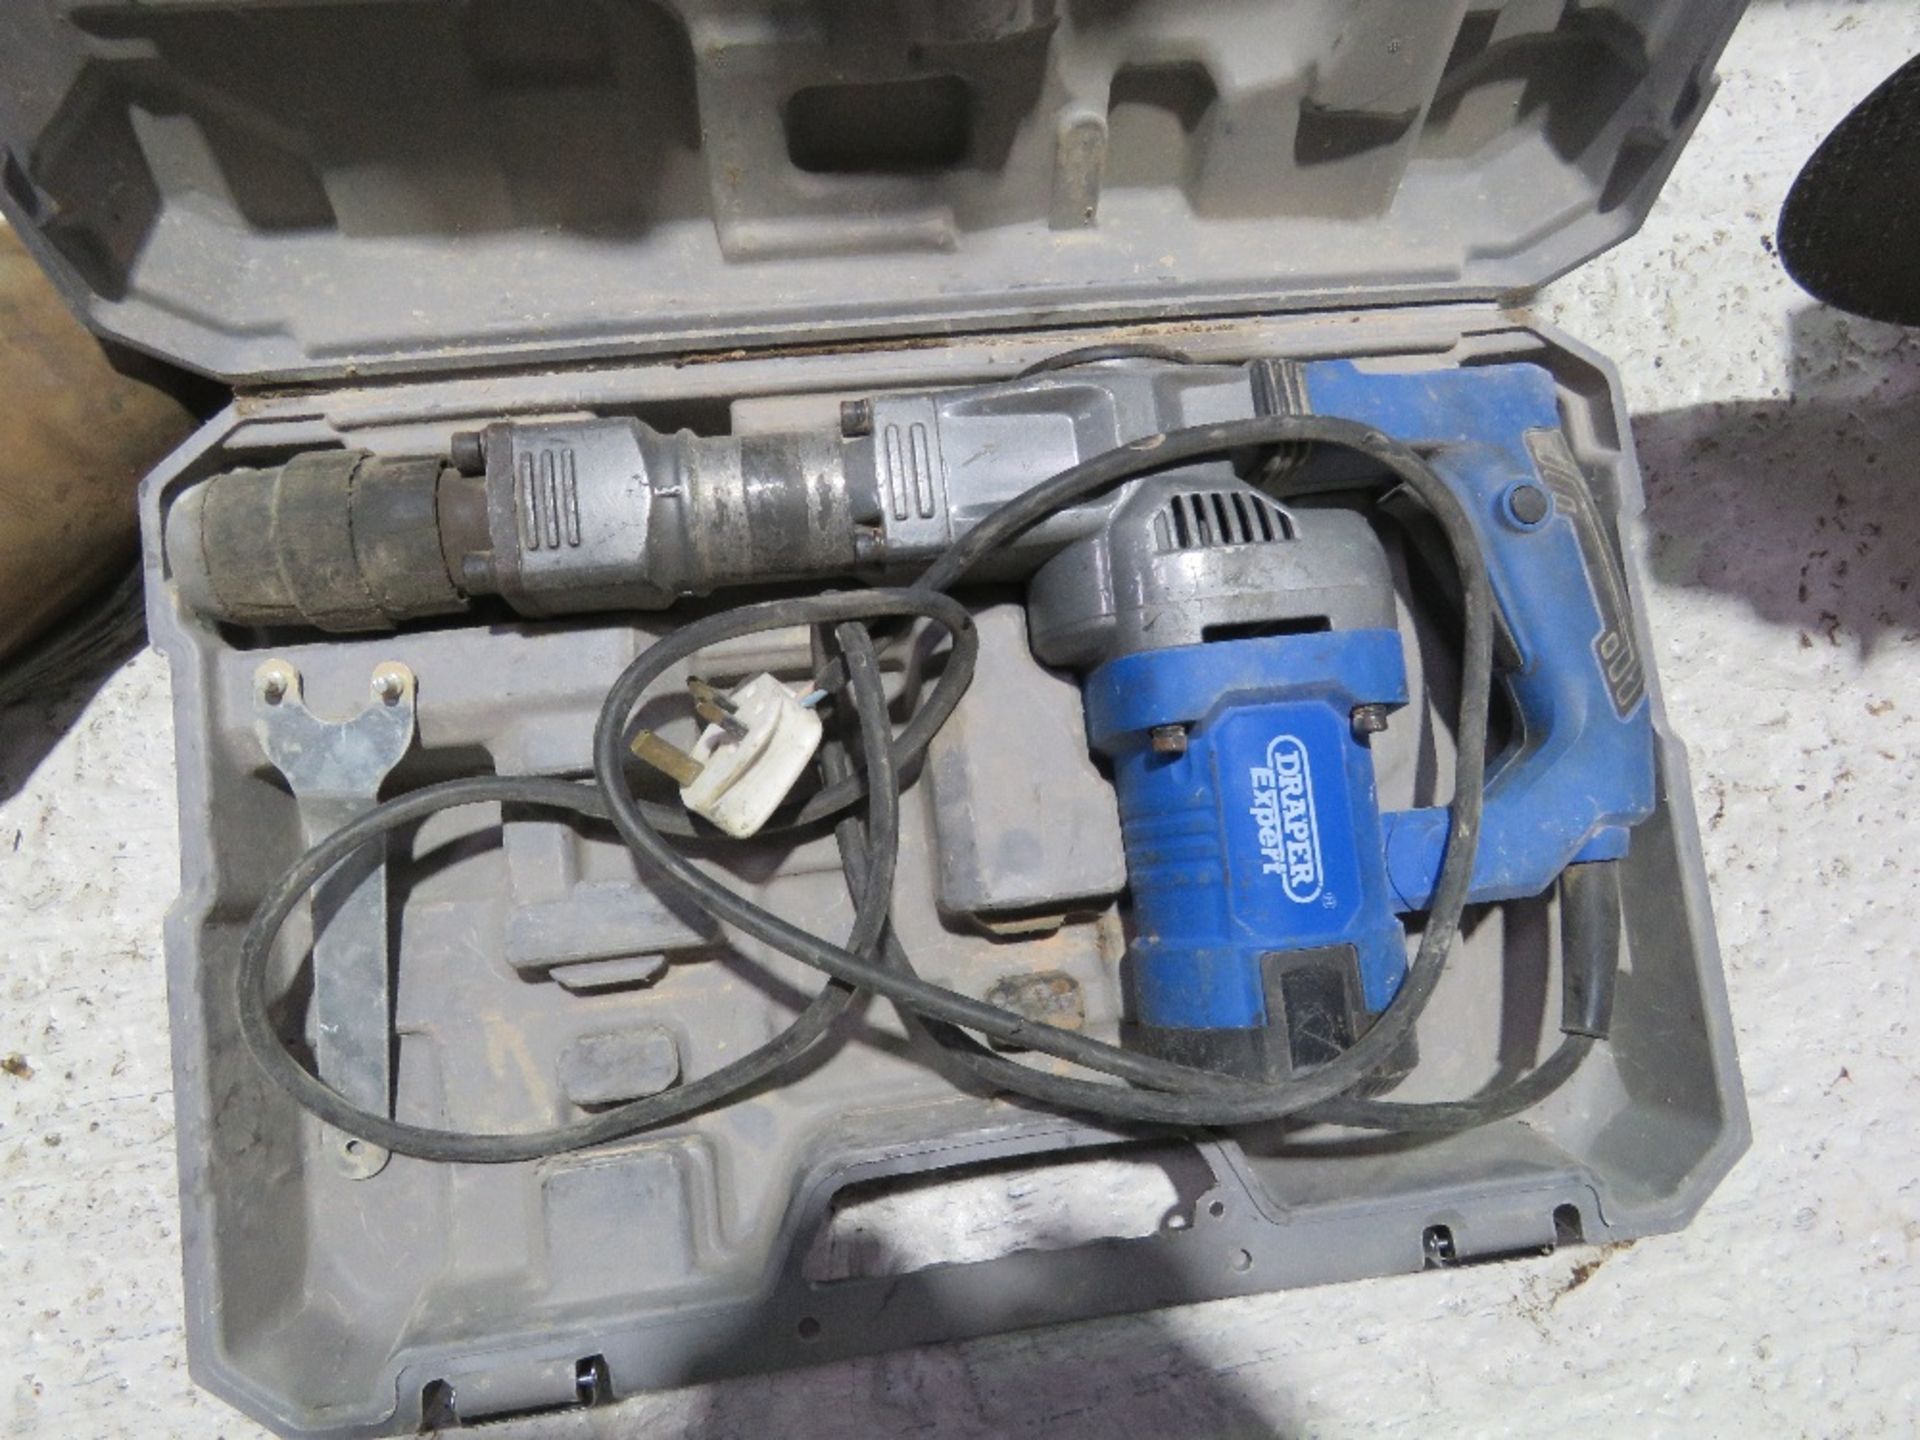 3NO 240 VOLT POWER TOOLS: 2 X DRILLS PLUS A JIGSAW. DIRECT FROM LOCAL RETIRING BUILDER. THIS LO - Image 5 of 7